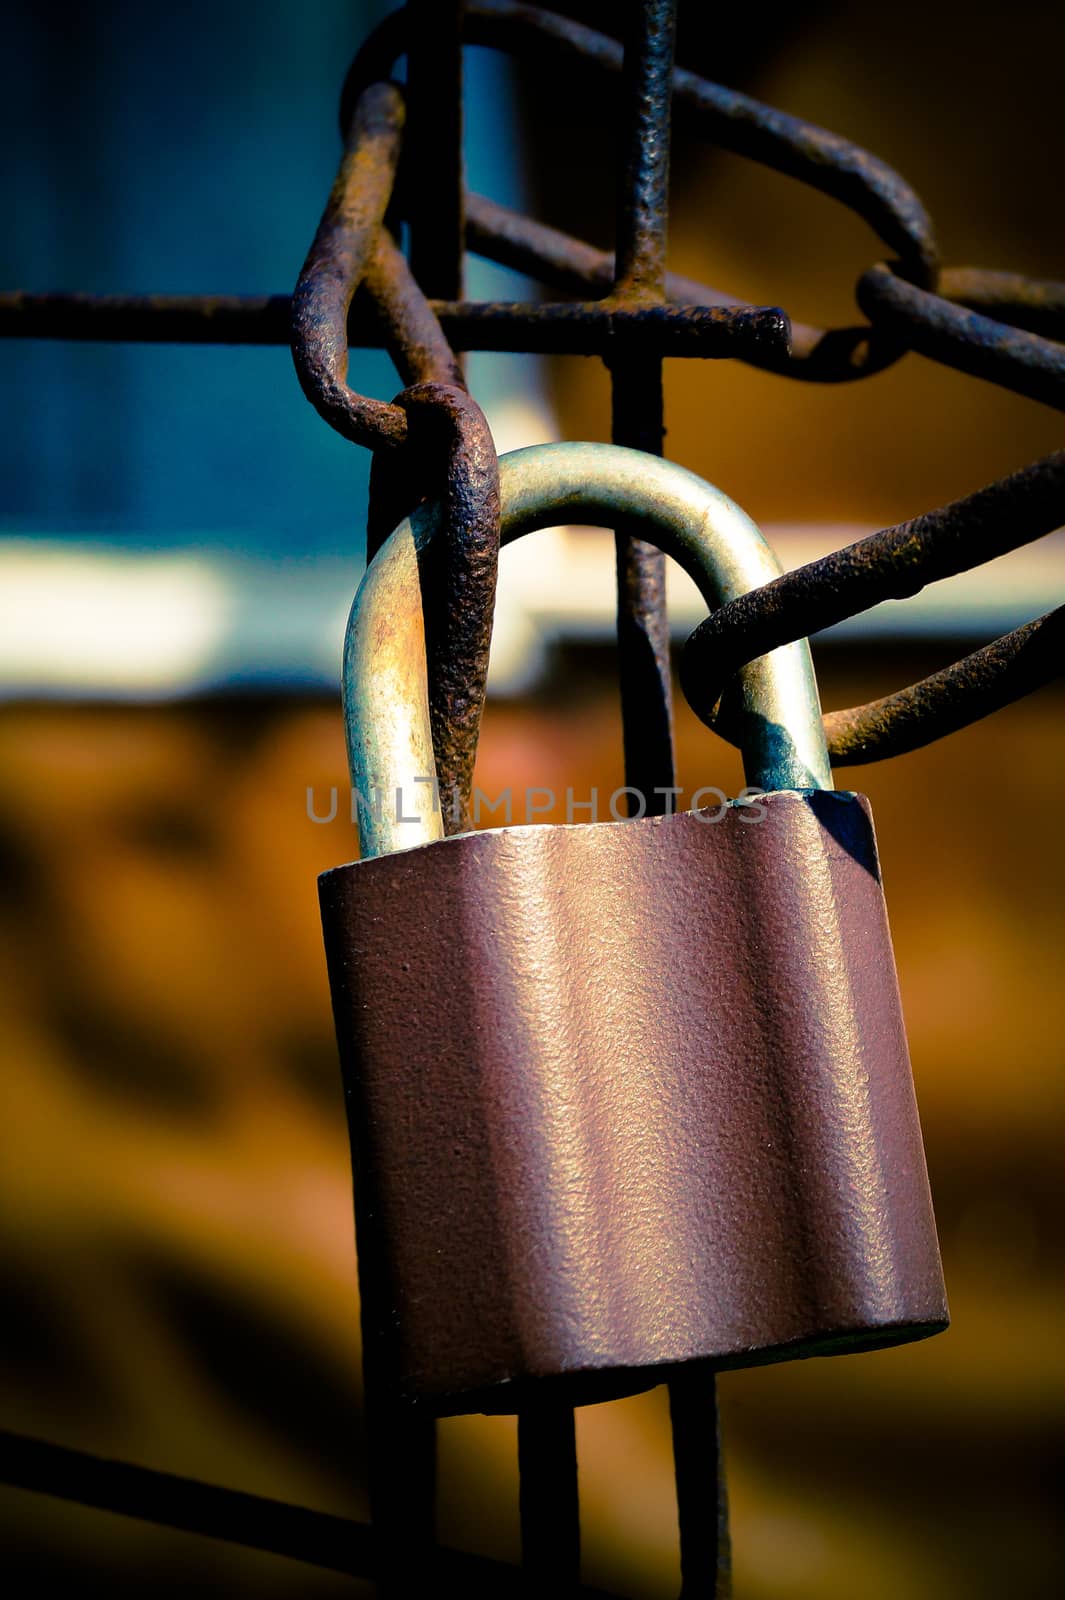 the lock on a metal chain macro photo by Oleczka11